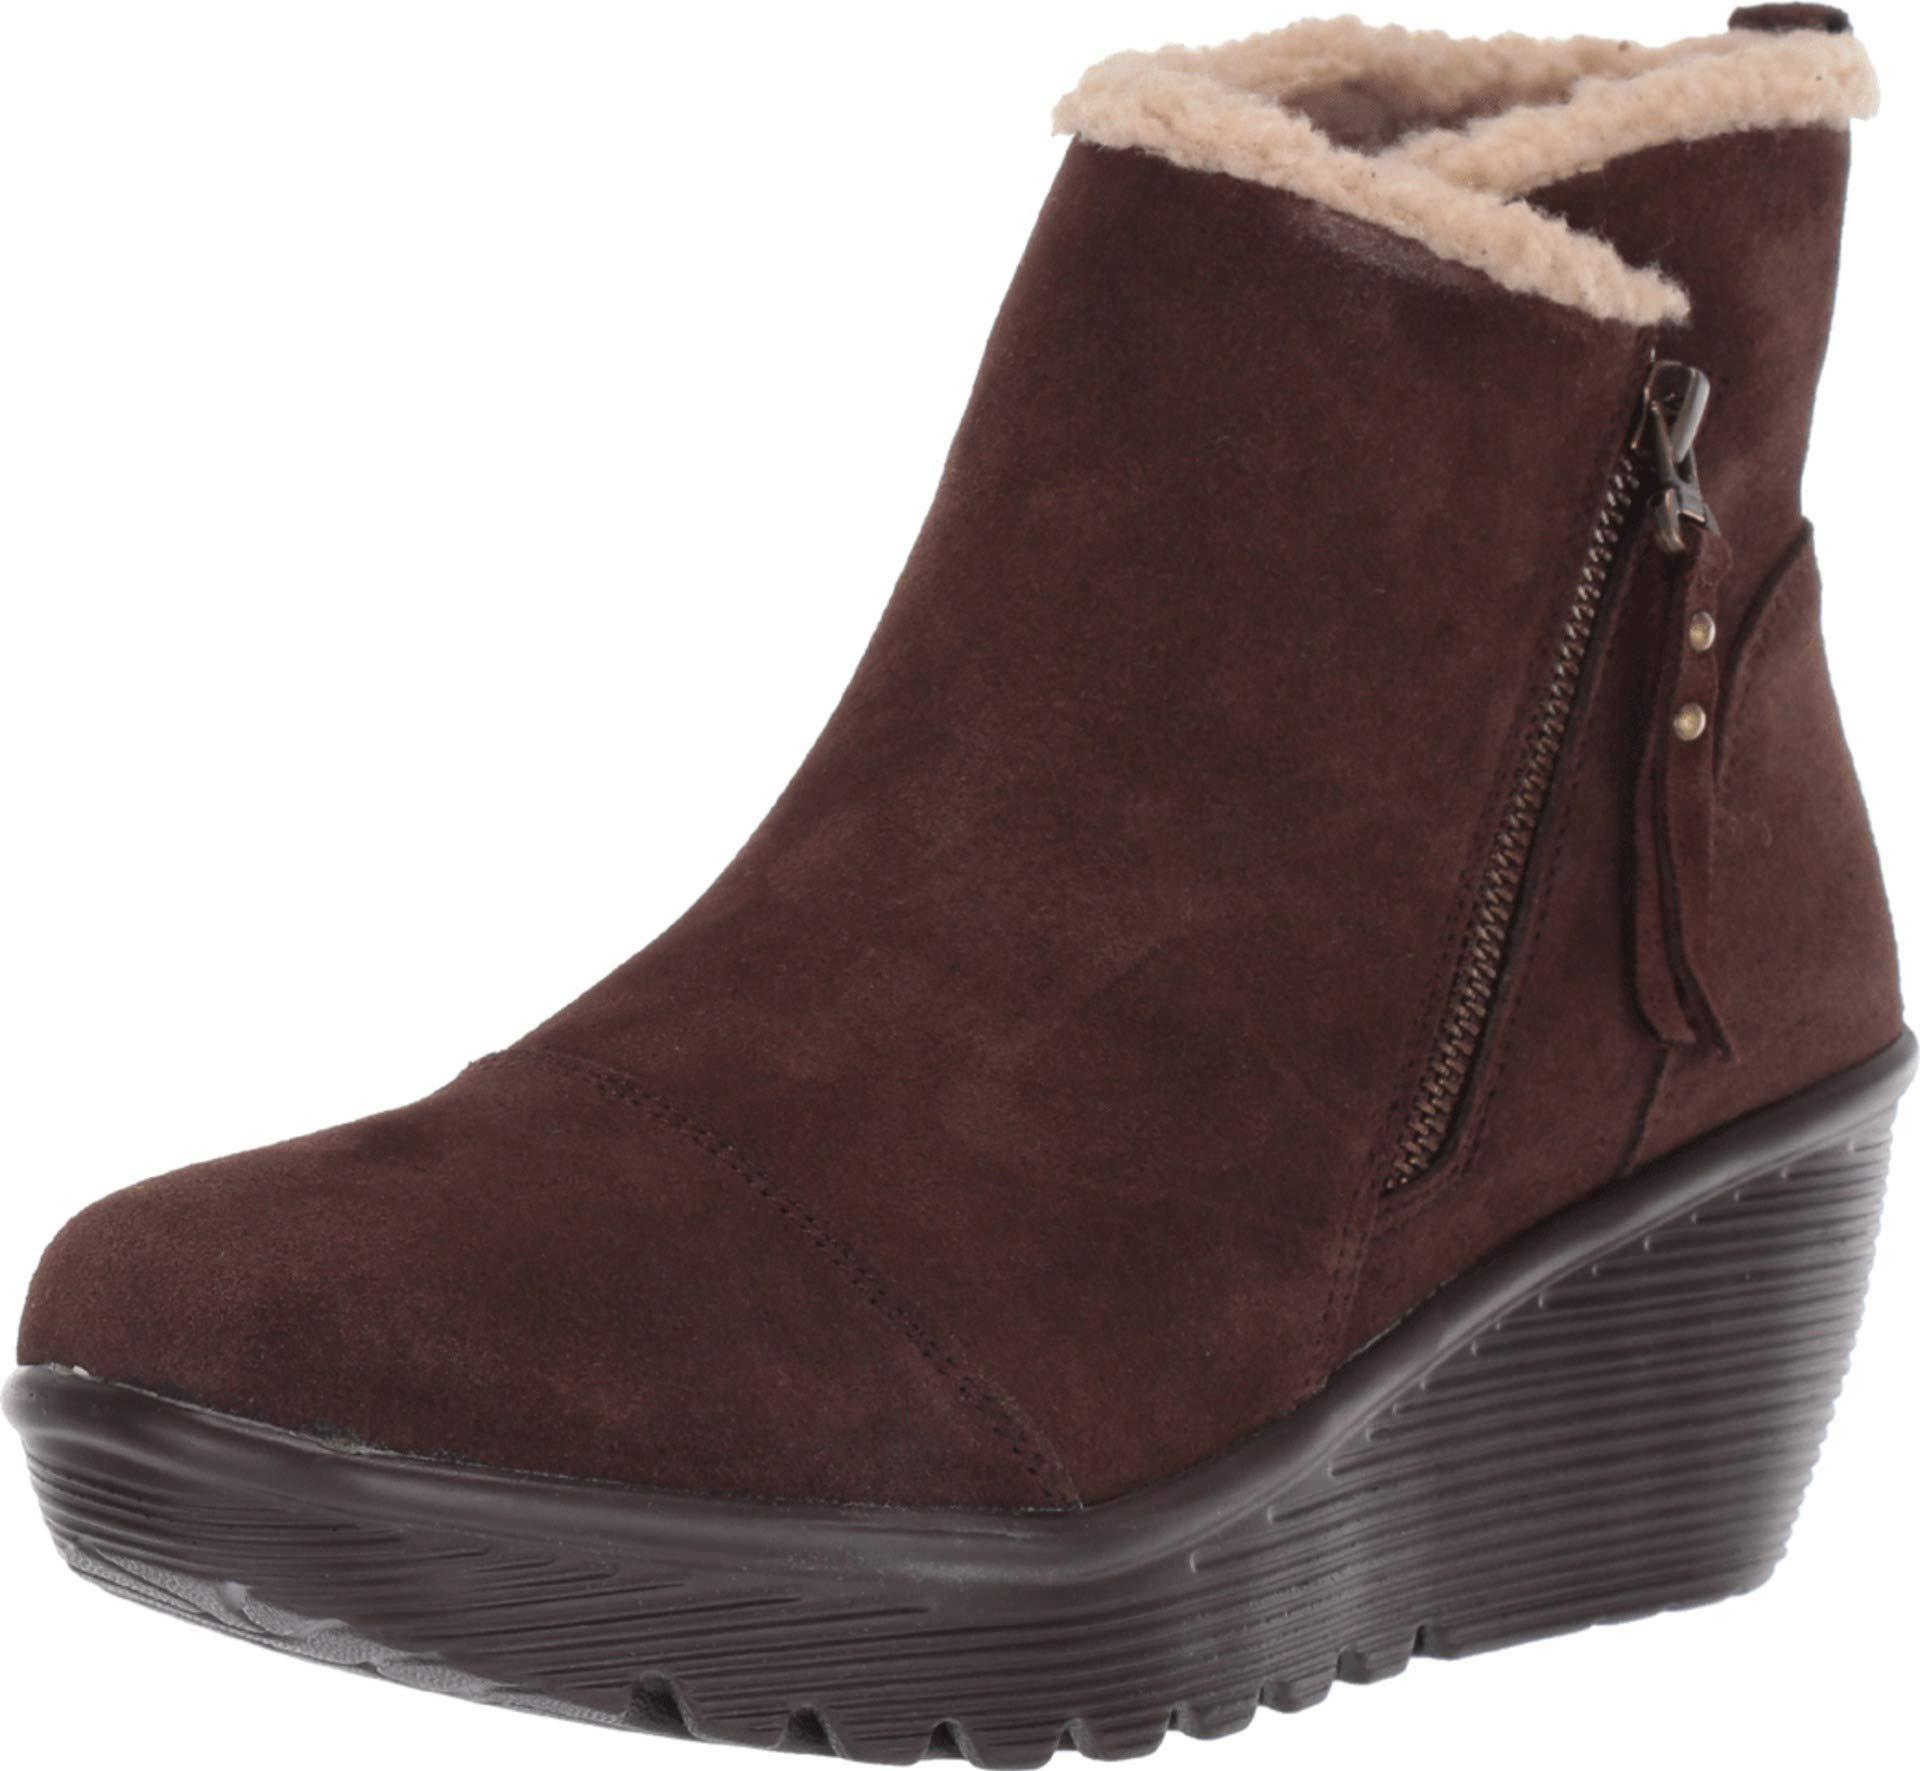 Skechers Parallel-zip Up Wedge Casual Comfort Ankle Boot Fashion in ...